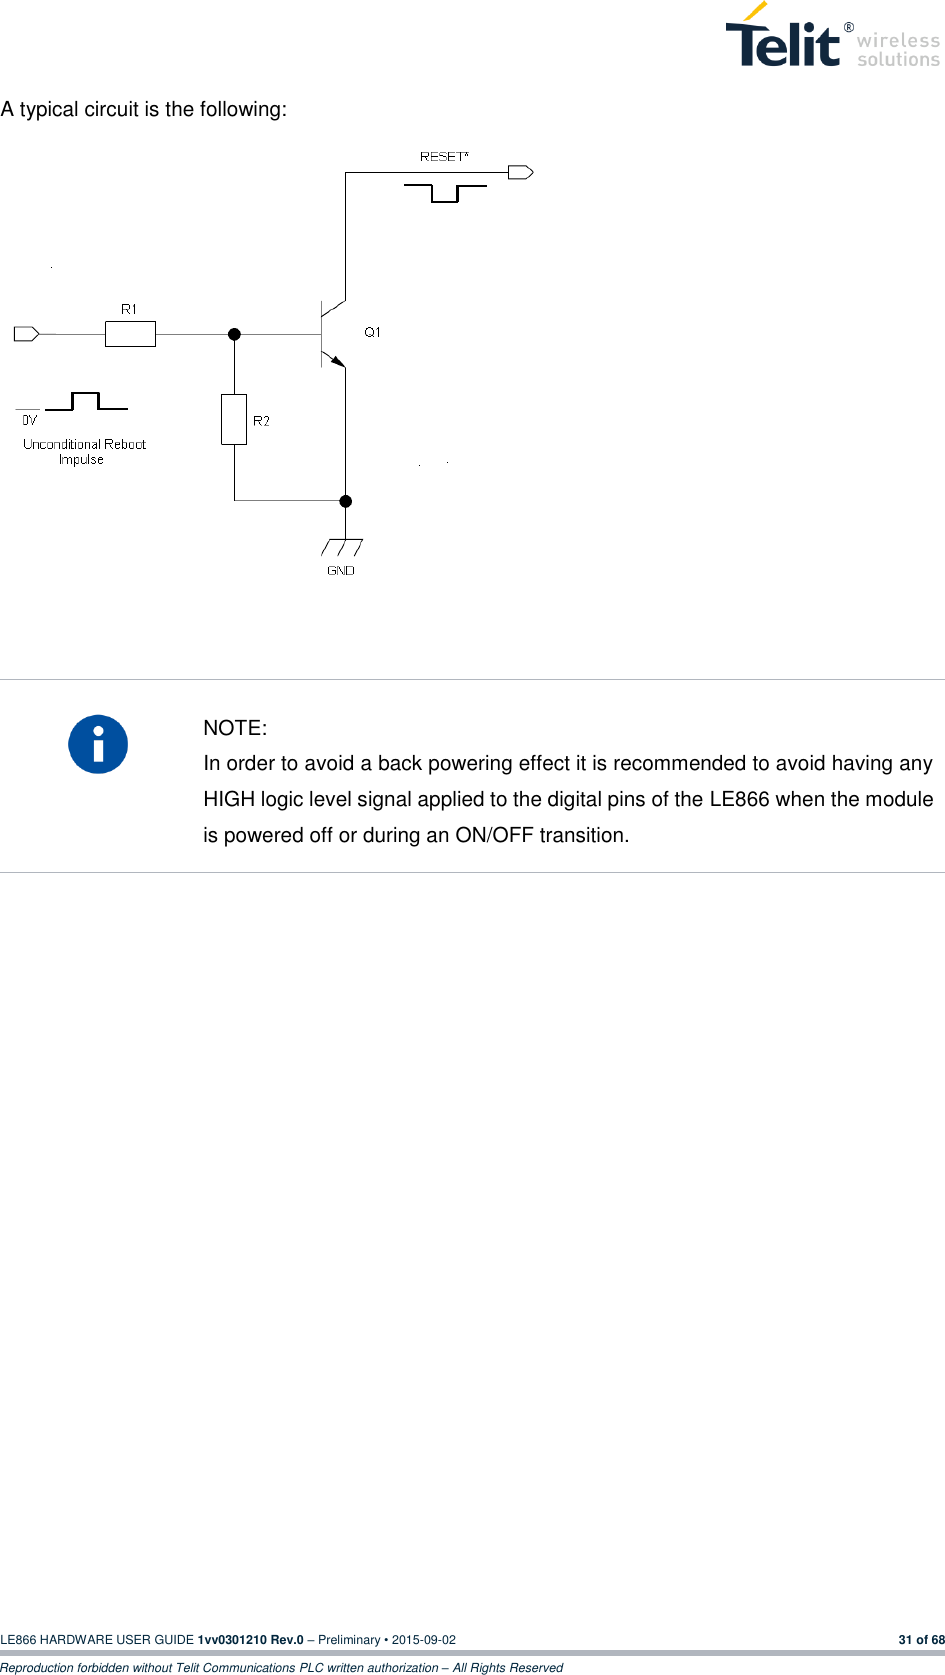  LE866 HARDWARE USER GUIDE 1vv0301210 Rev.0 – Preliminary • 2015-09-02 31 of 68 Reproduction forbidden without Telit Communications PLC written authorization – All Rights Reserved A typical circuit is the following:          NOTE: In order to avoid a back powering effect it is recommended to avoid having any HIGH logic level signal applied to the digital pins of the LE866 when the module is powered off or during an ON/OFF transition.          